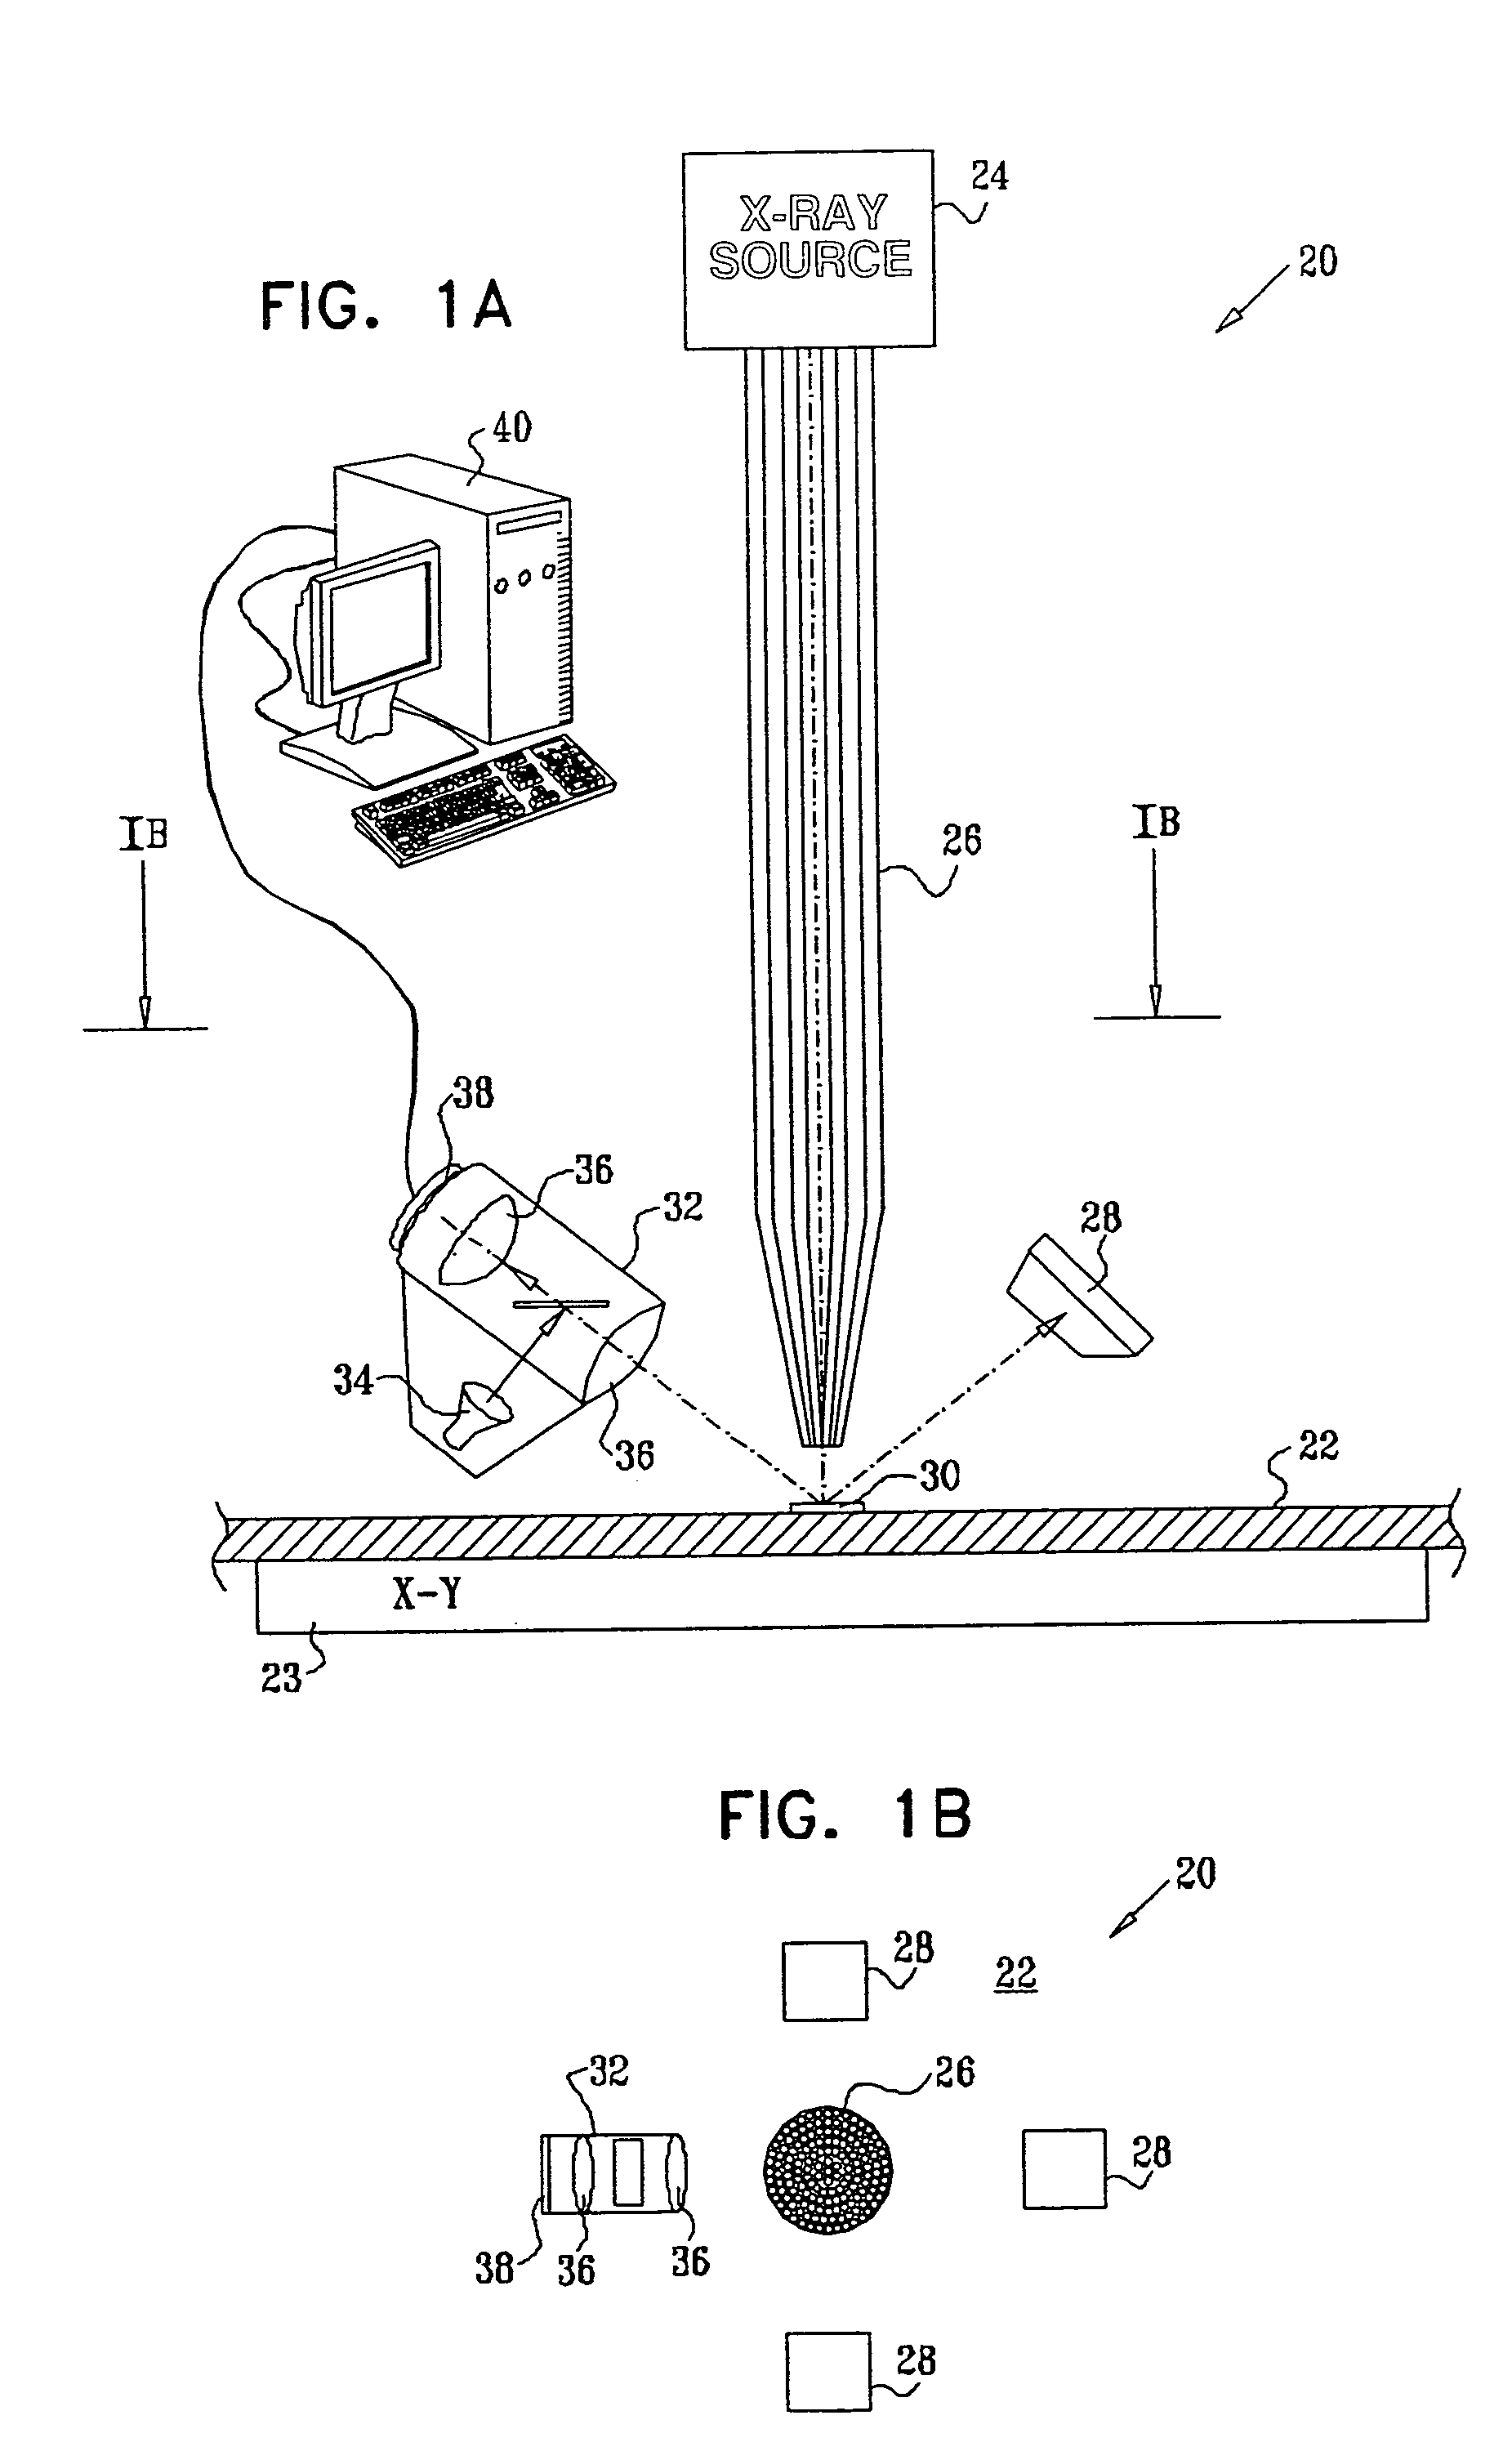 Optical alignment of X-ray microanalyzers